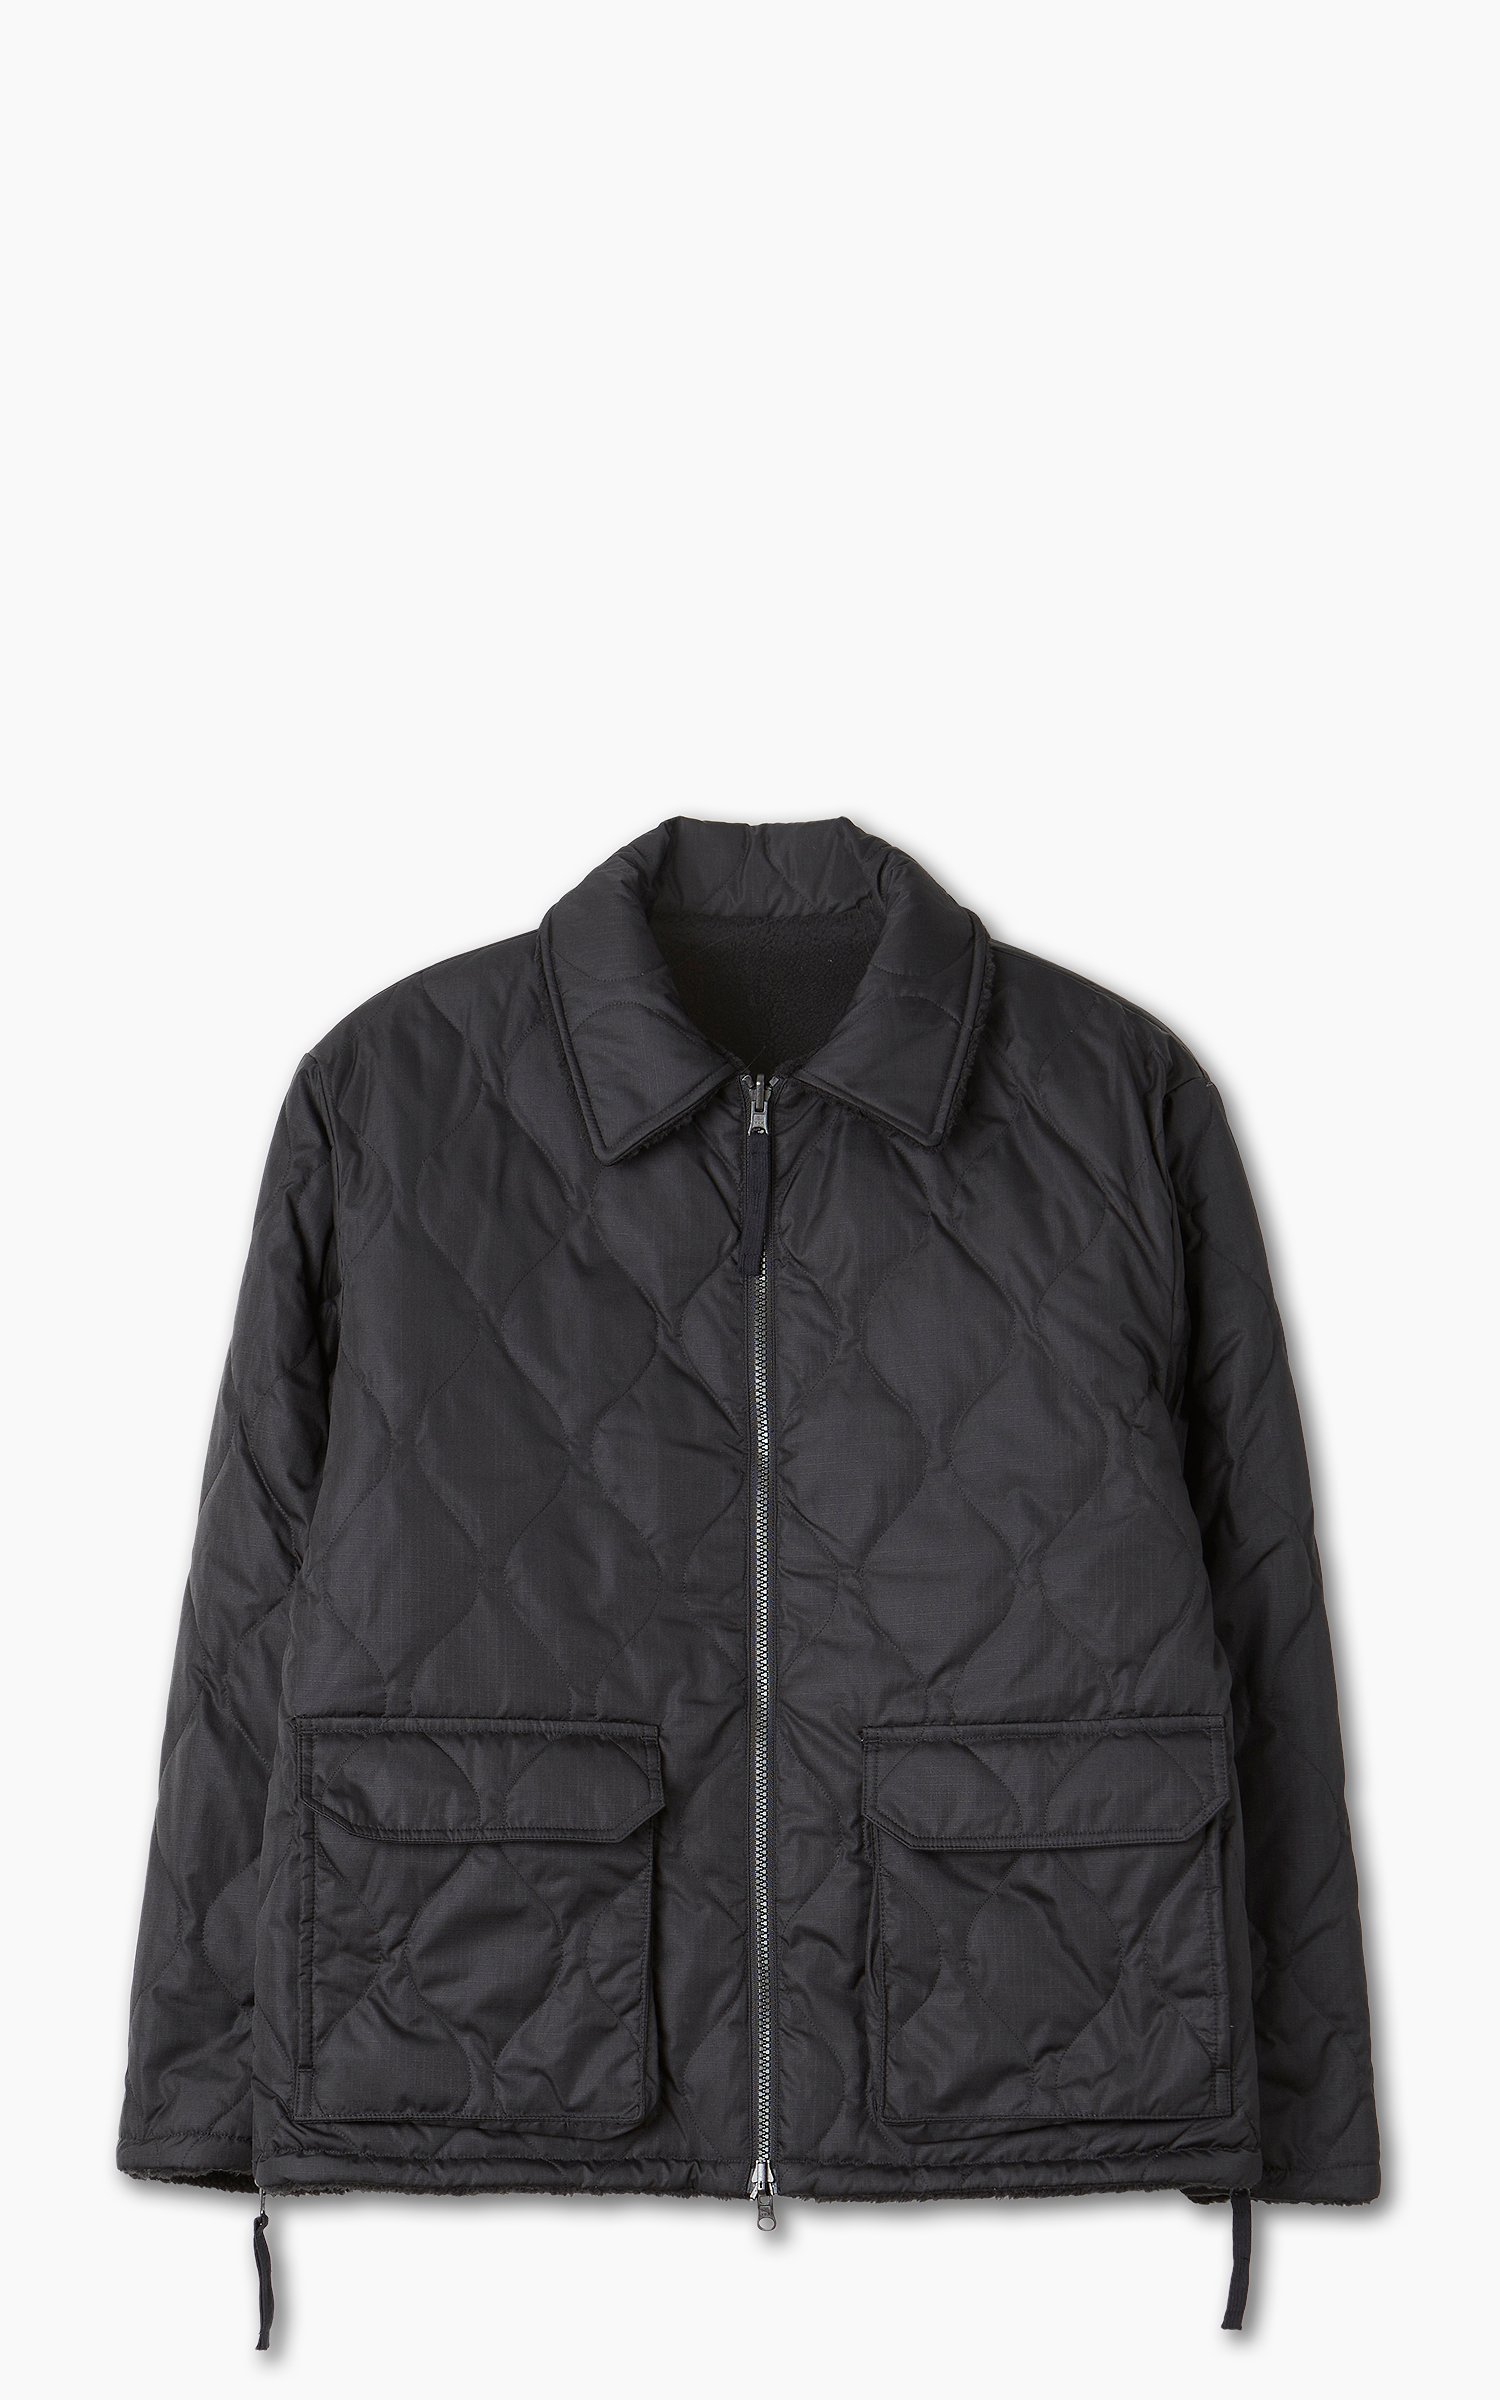 Taion Reversible Military Down Jacket Black/Black | Cultizm